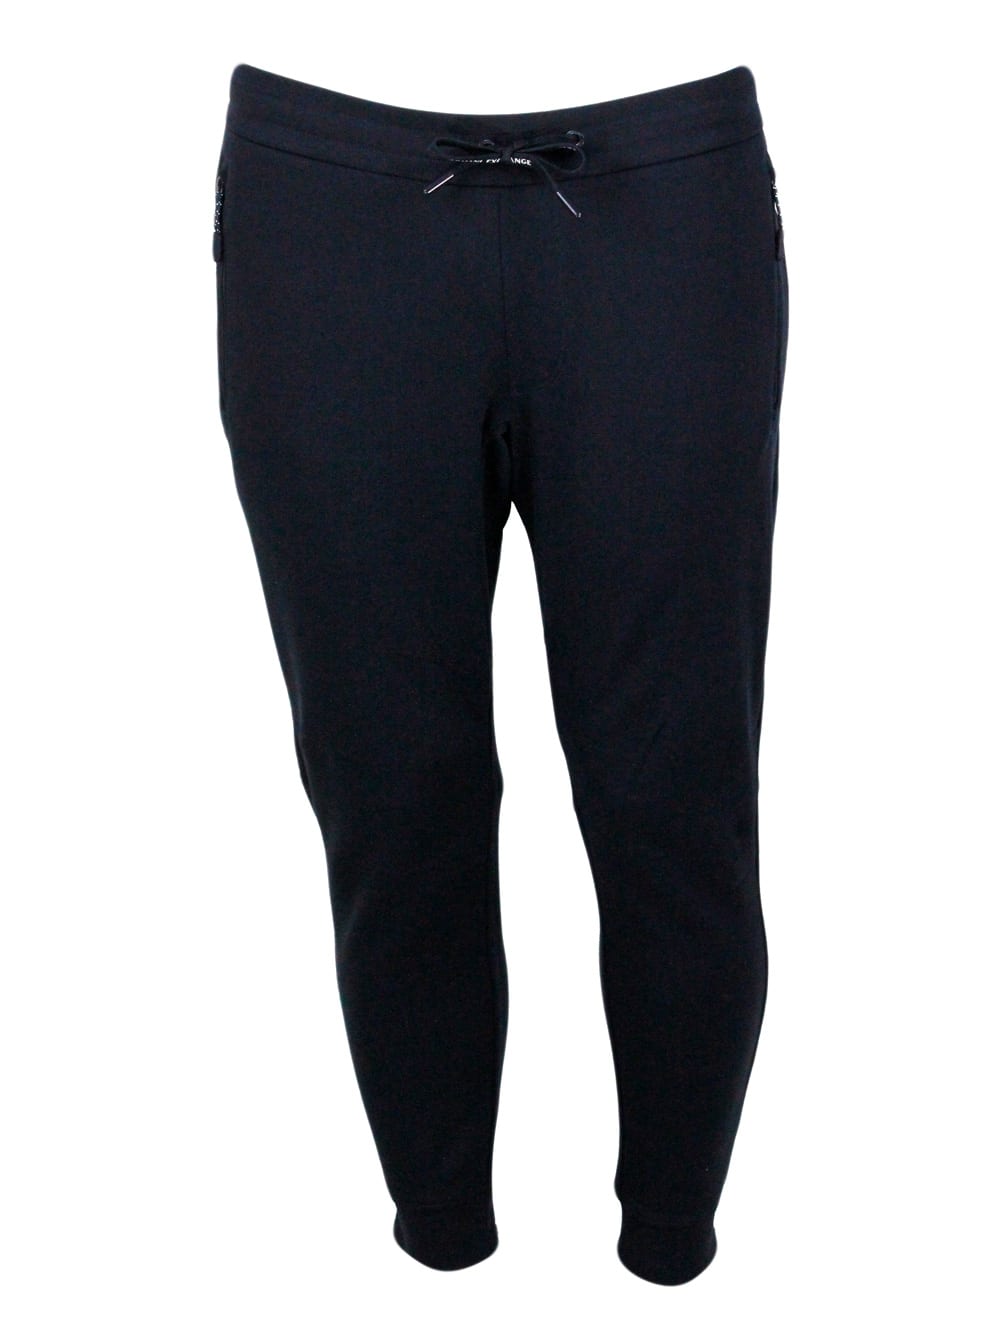 Cotton Fleece Jogging Trousers With Drawstring At The Waist And Cuff At The Bottom